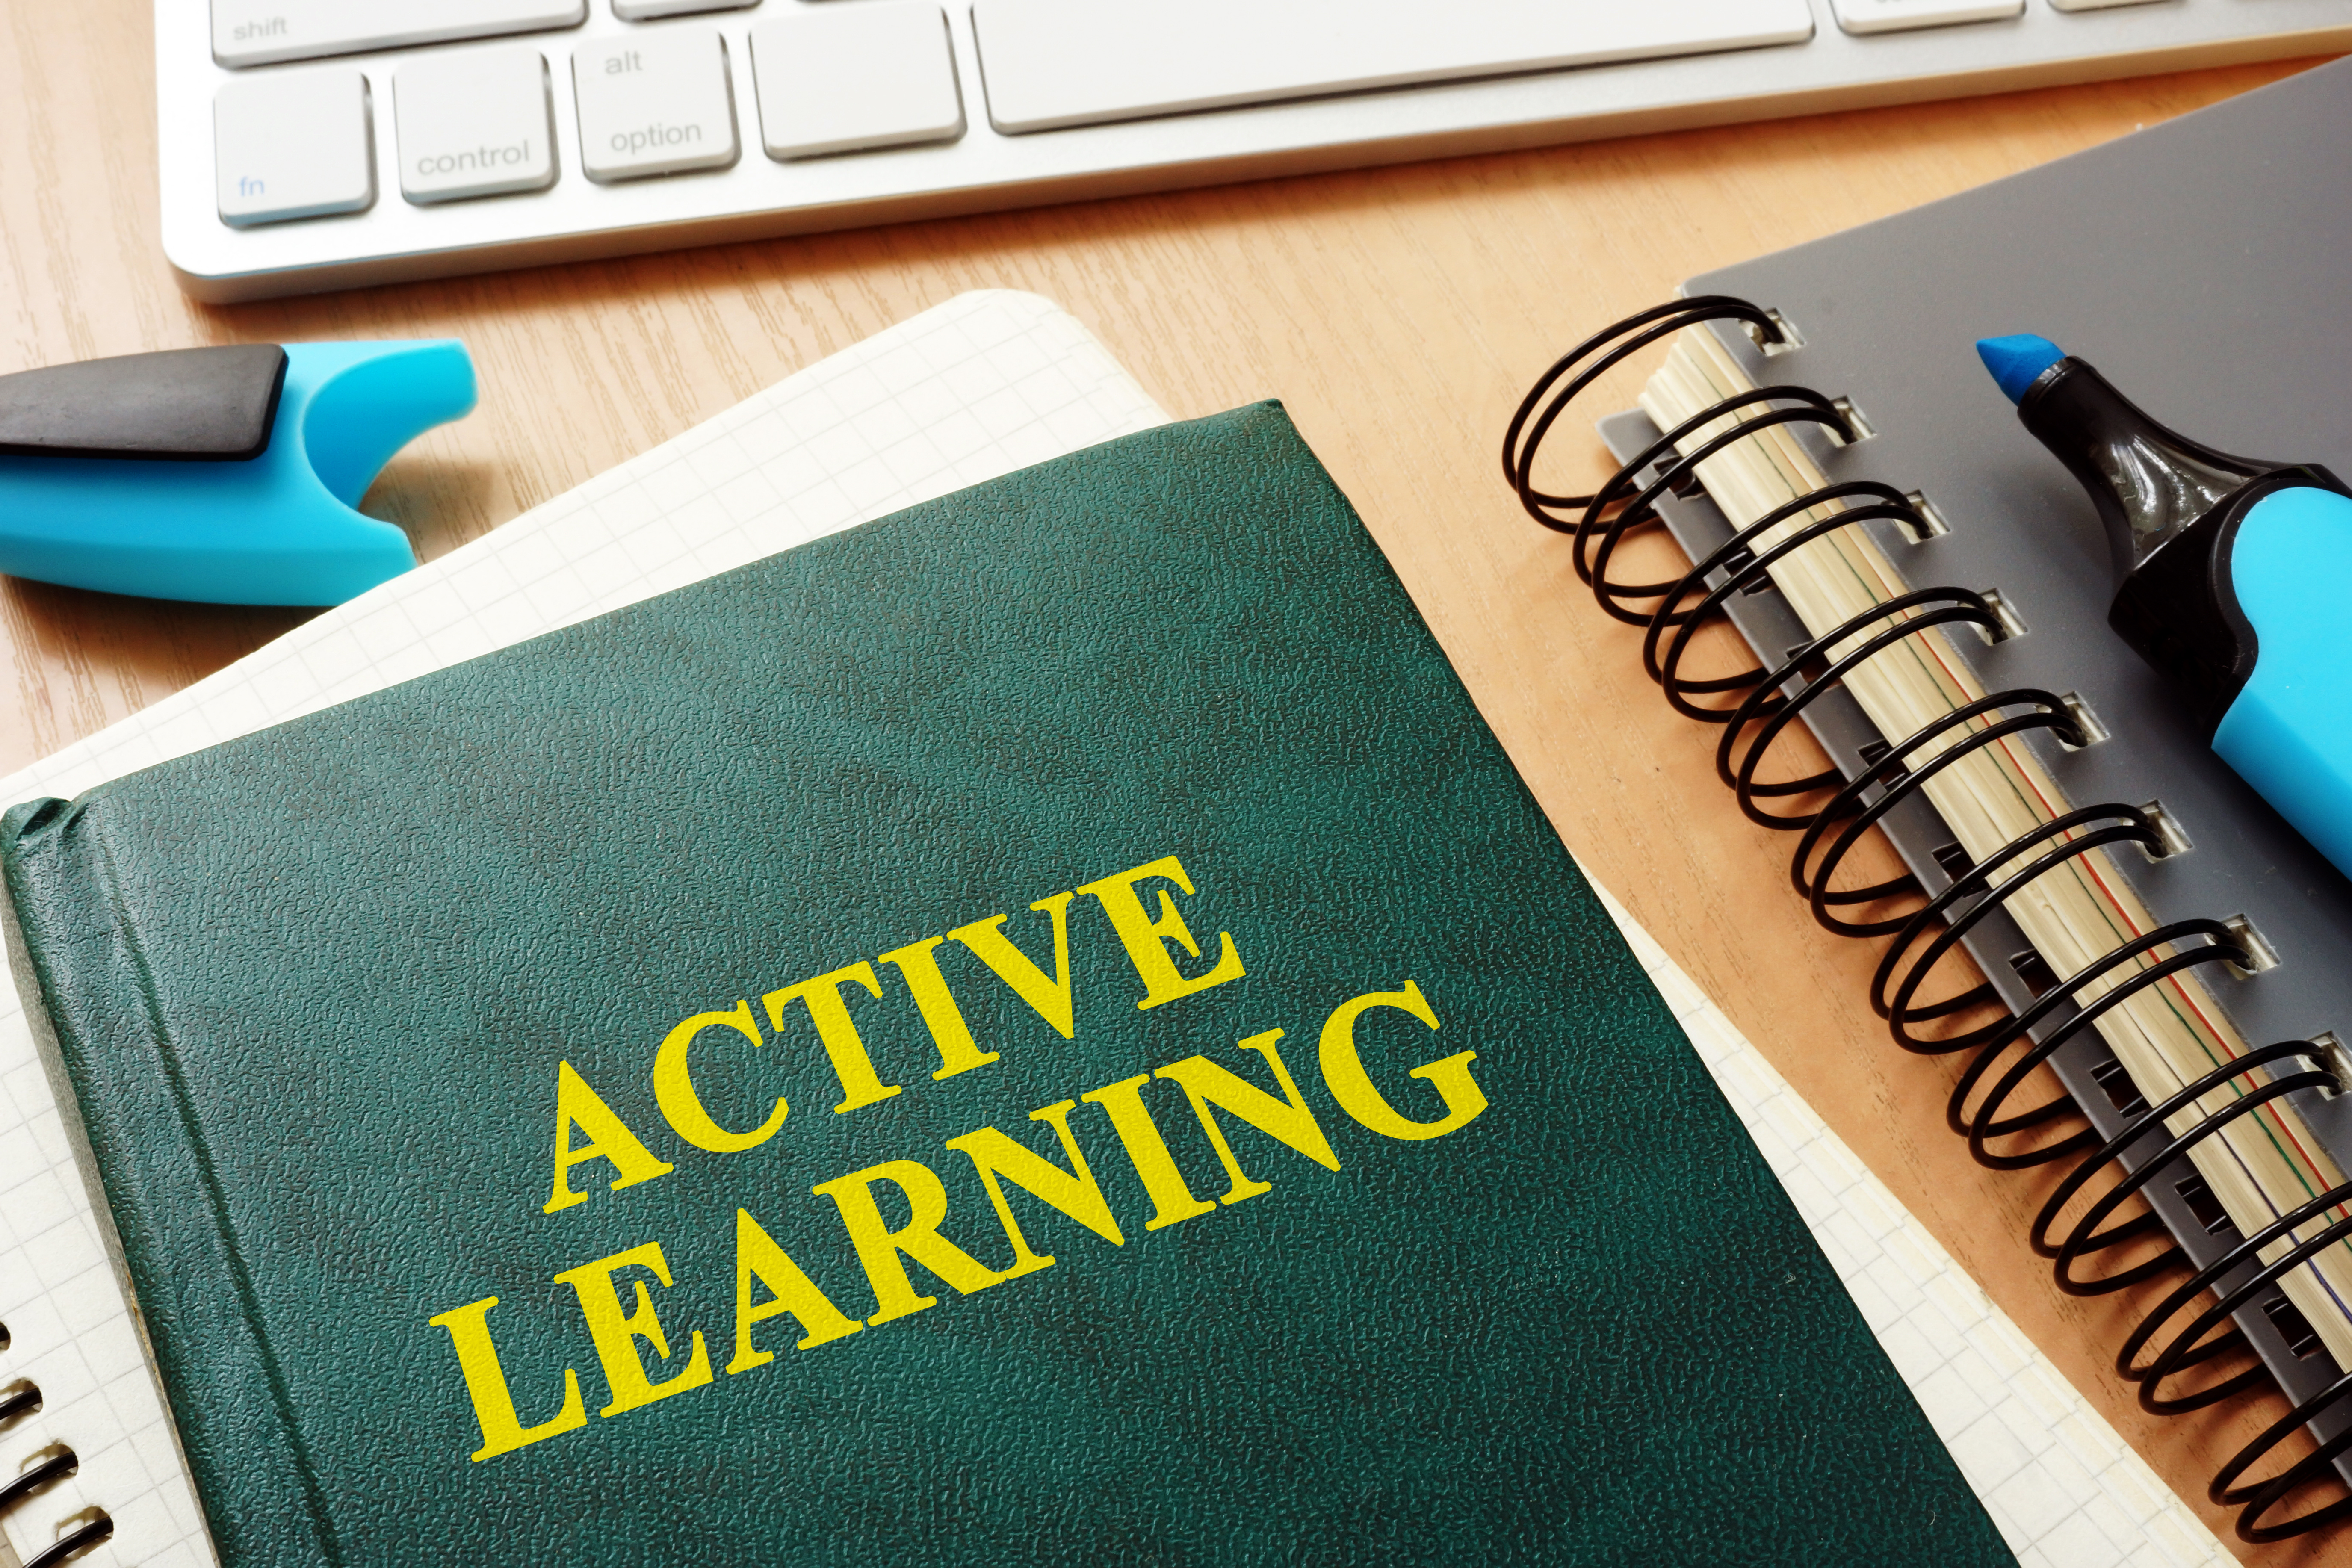 What is active learning and how to implement it